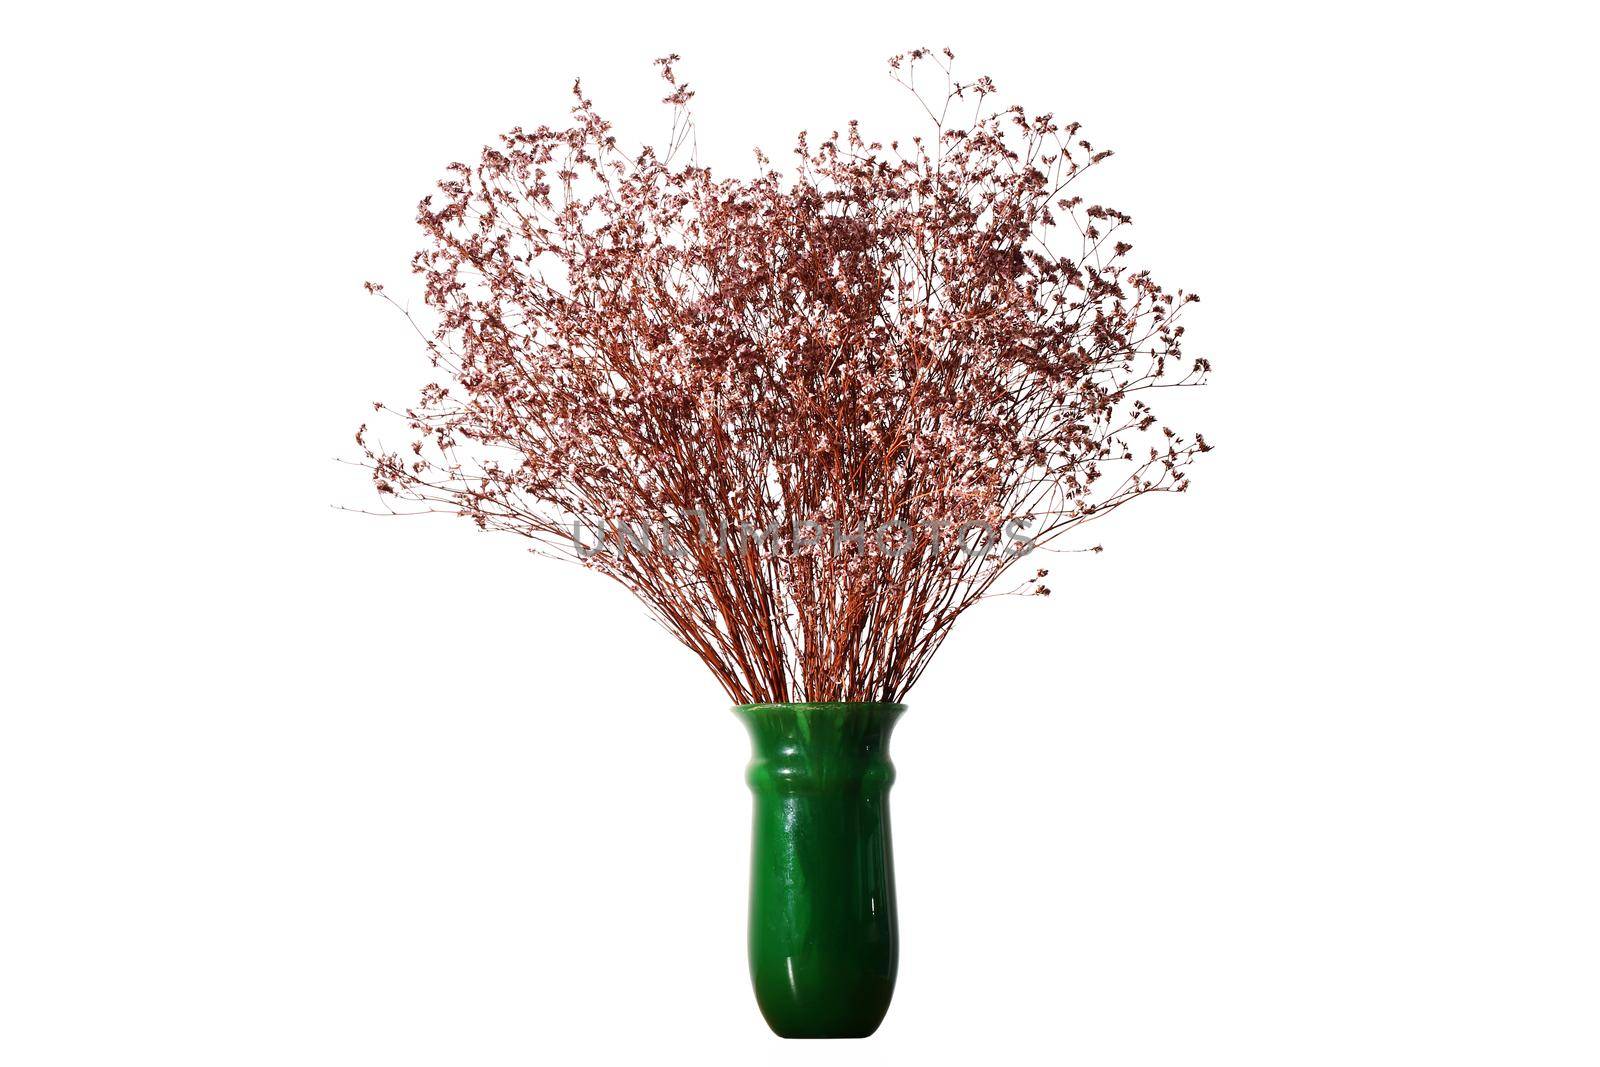 Dried flowers on vase, Isolated on white with clipping path